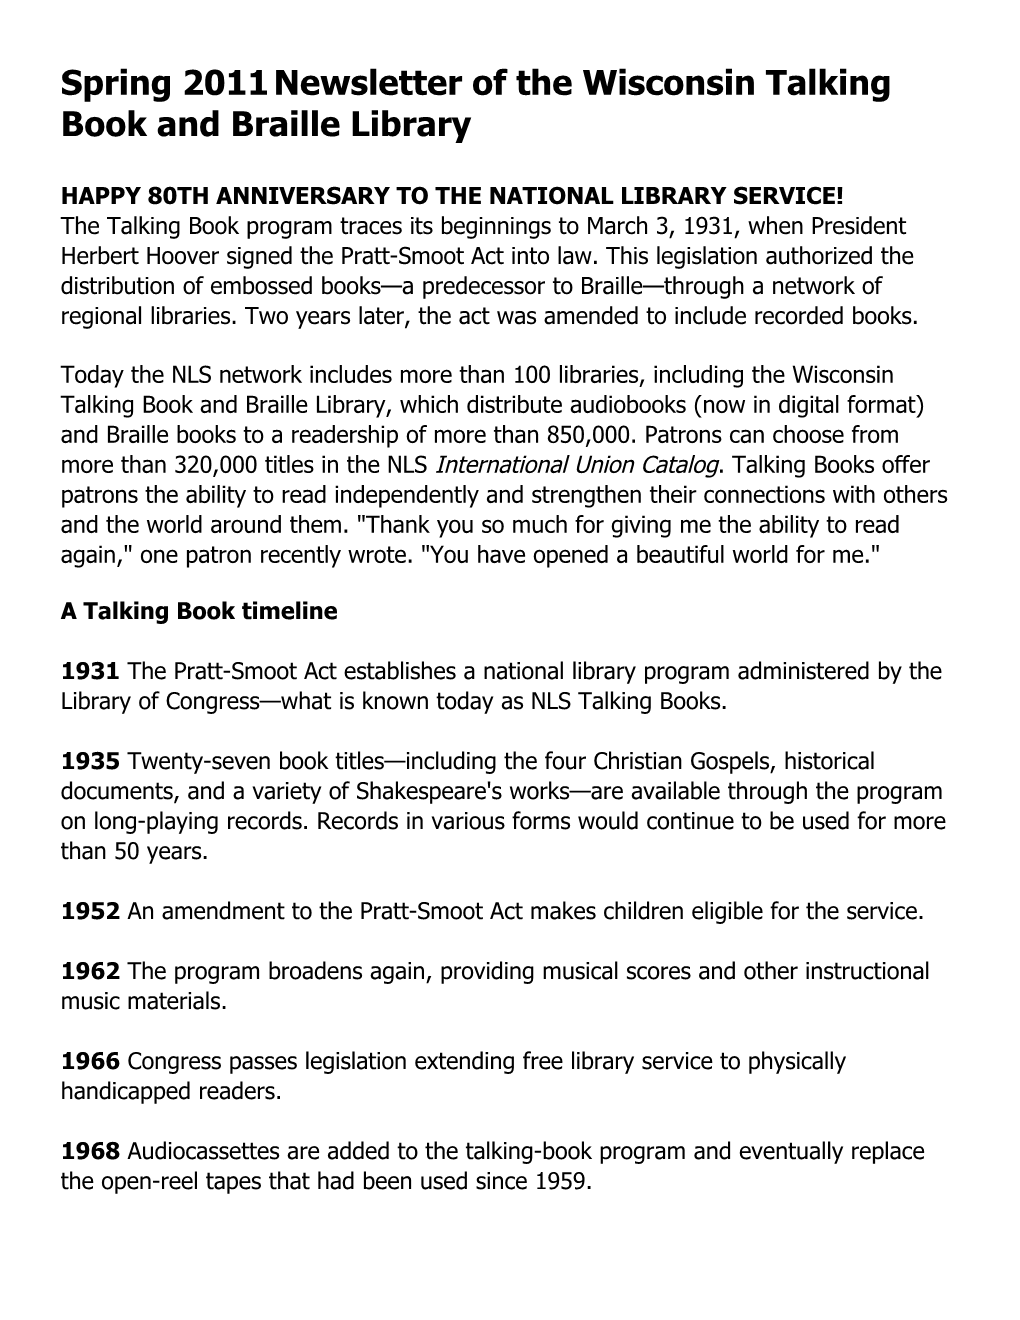 Spring 2011Newsletter of the Wisconsin Talking Book and Braille Library